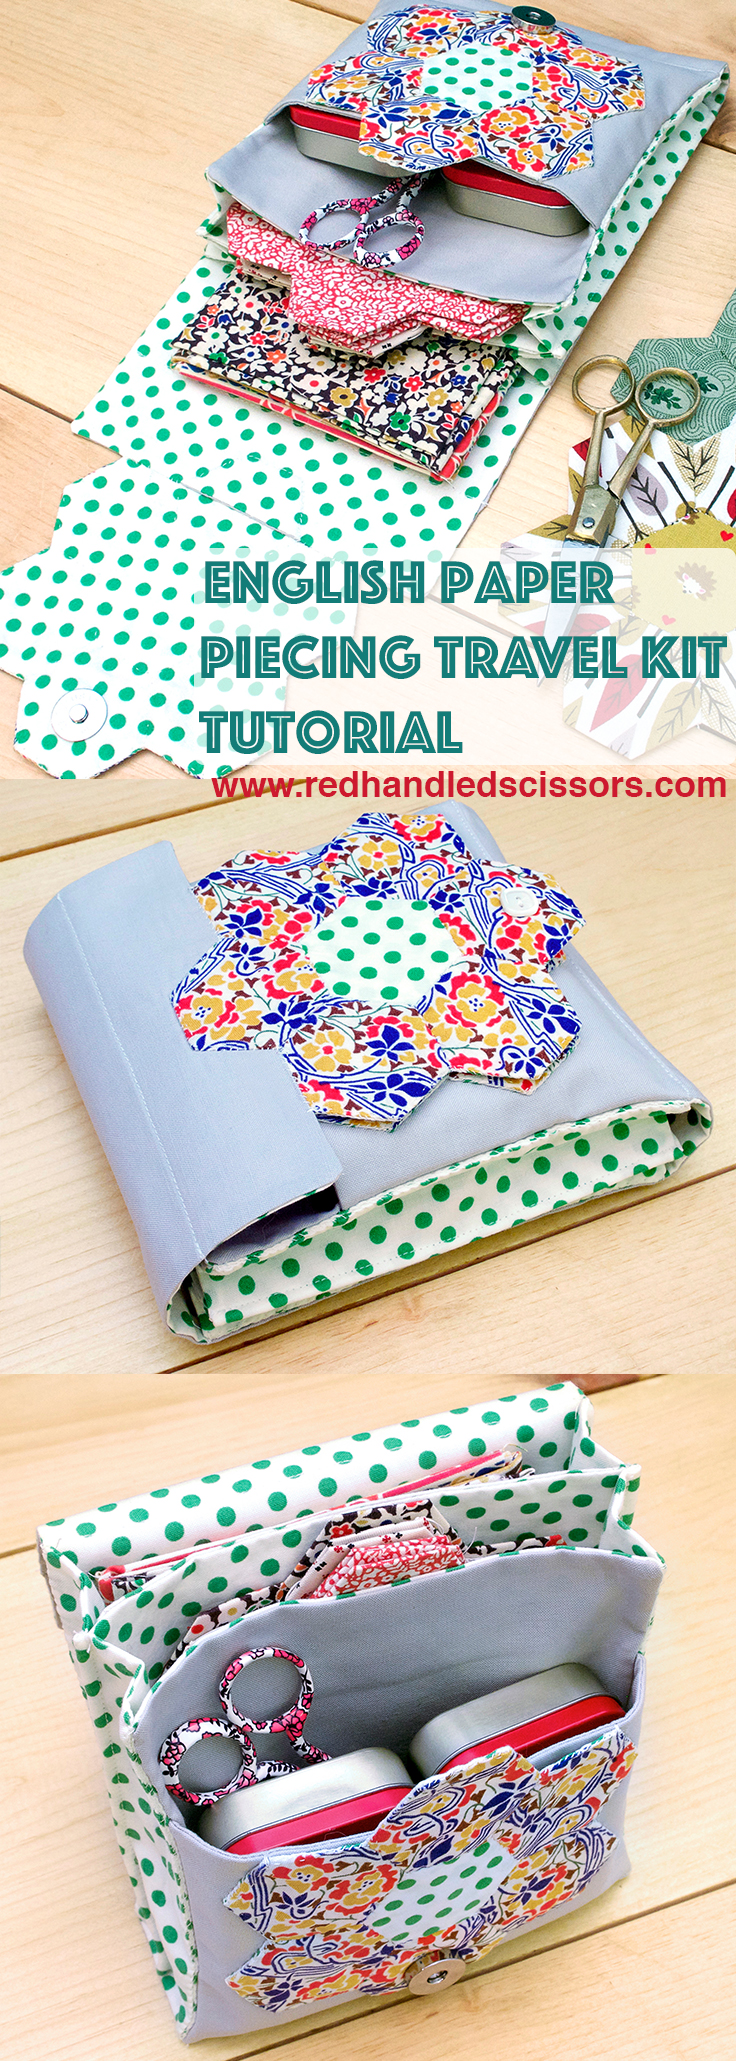 Tutorial: English Paper Piecing Travel Kit, Hexies Part 3: Hexie obsessed? Get your quilting fix on the go with part 3 of my English Paper Piecing tutorial series: the English paper piecing travel kit!